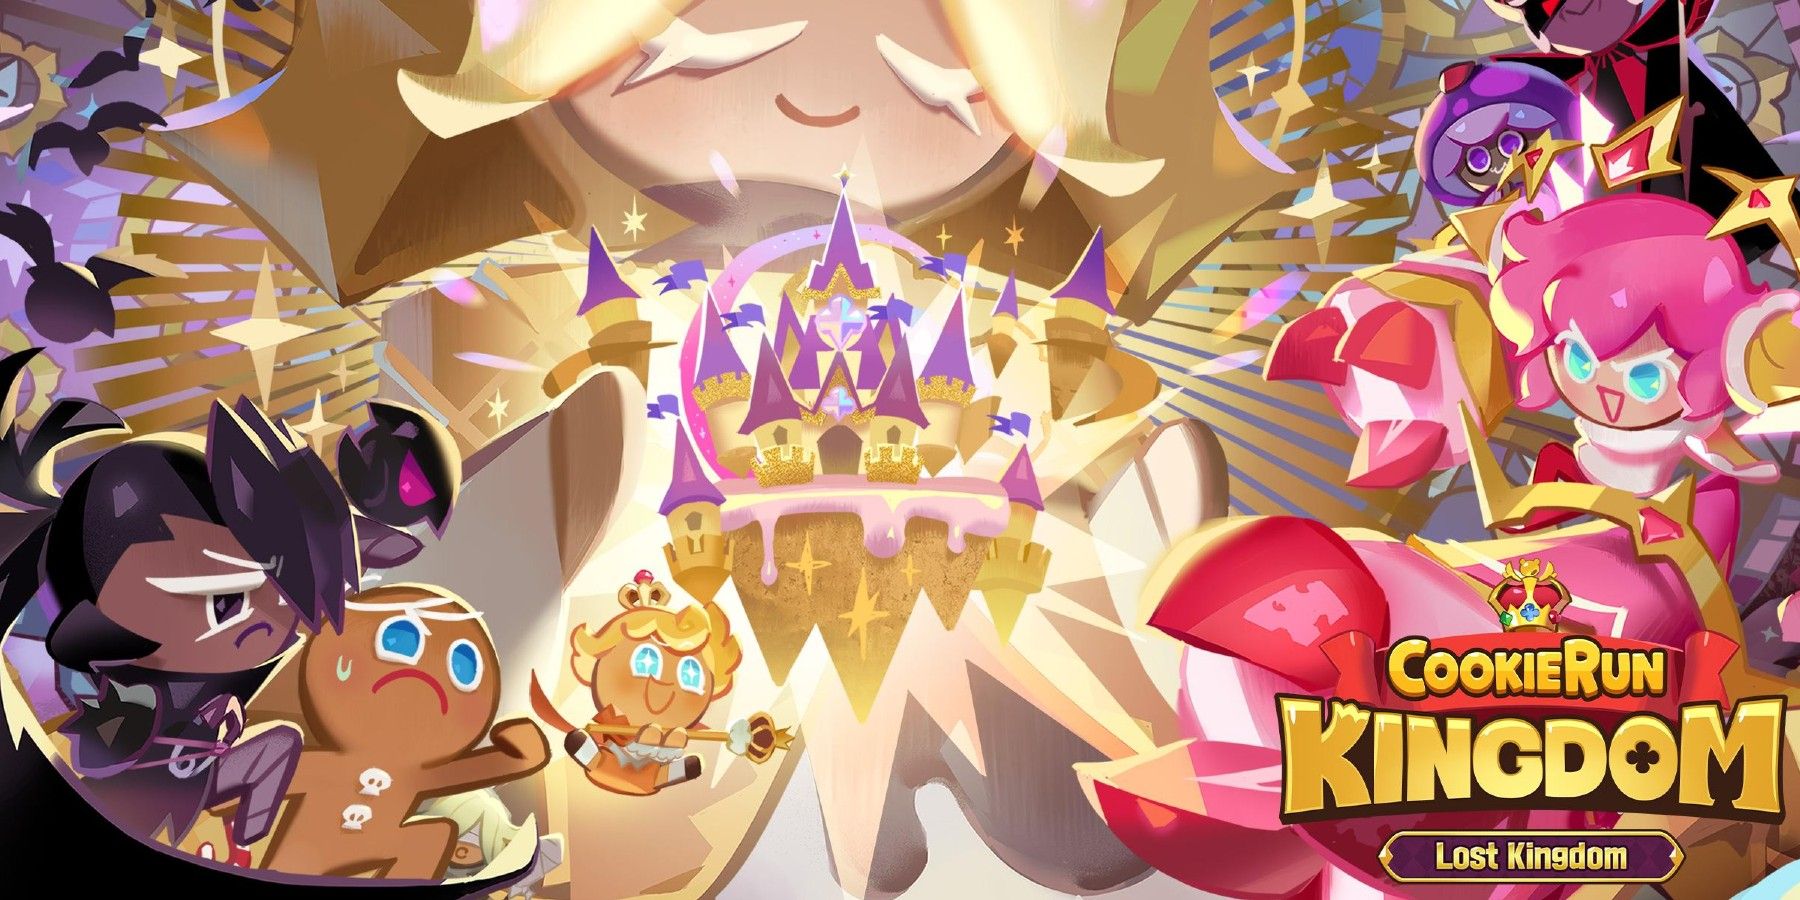 Explaining the Storyline in Cookie Run Kingdom